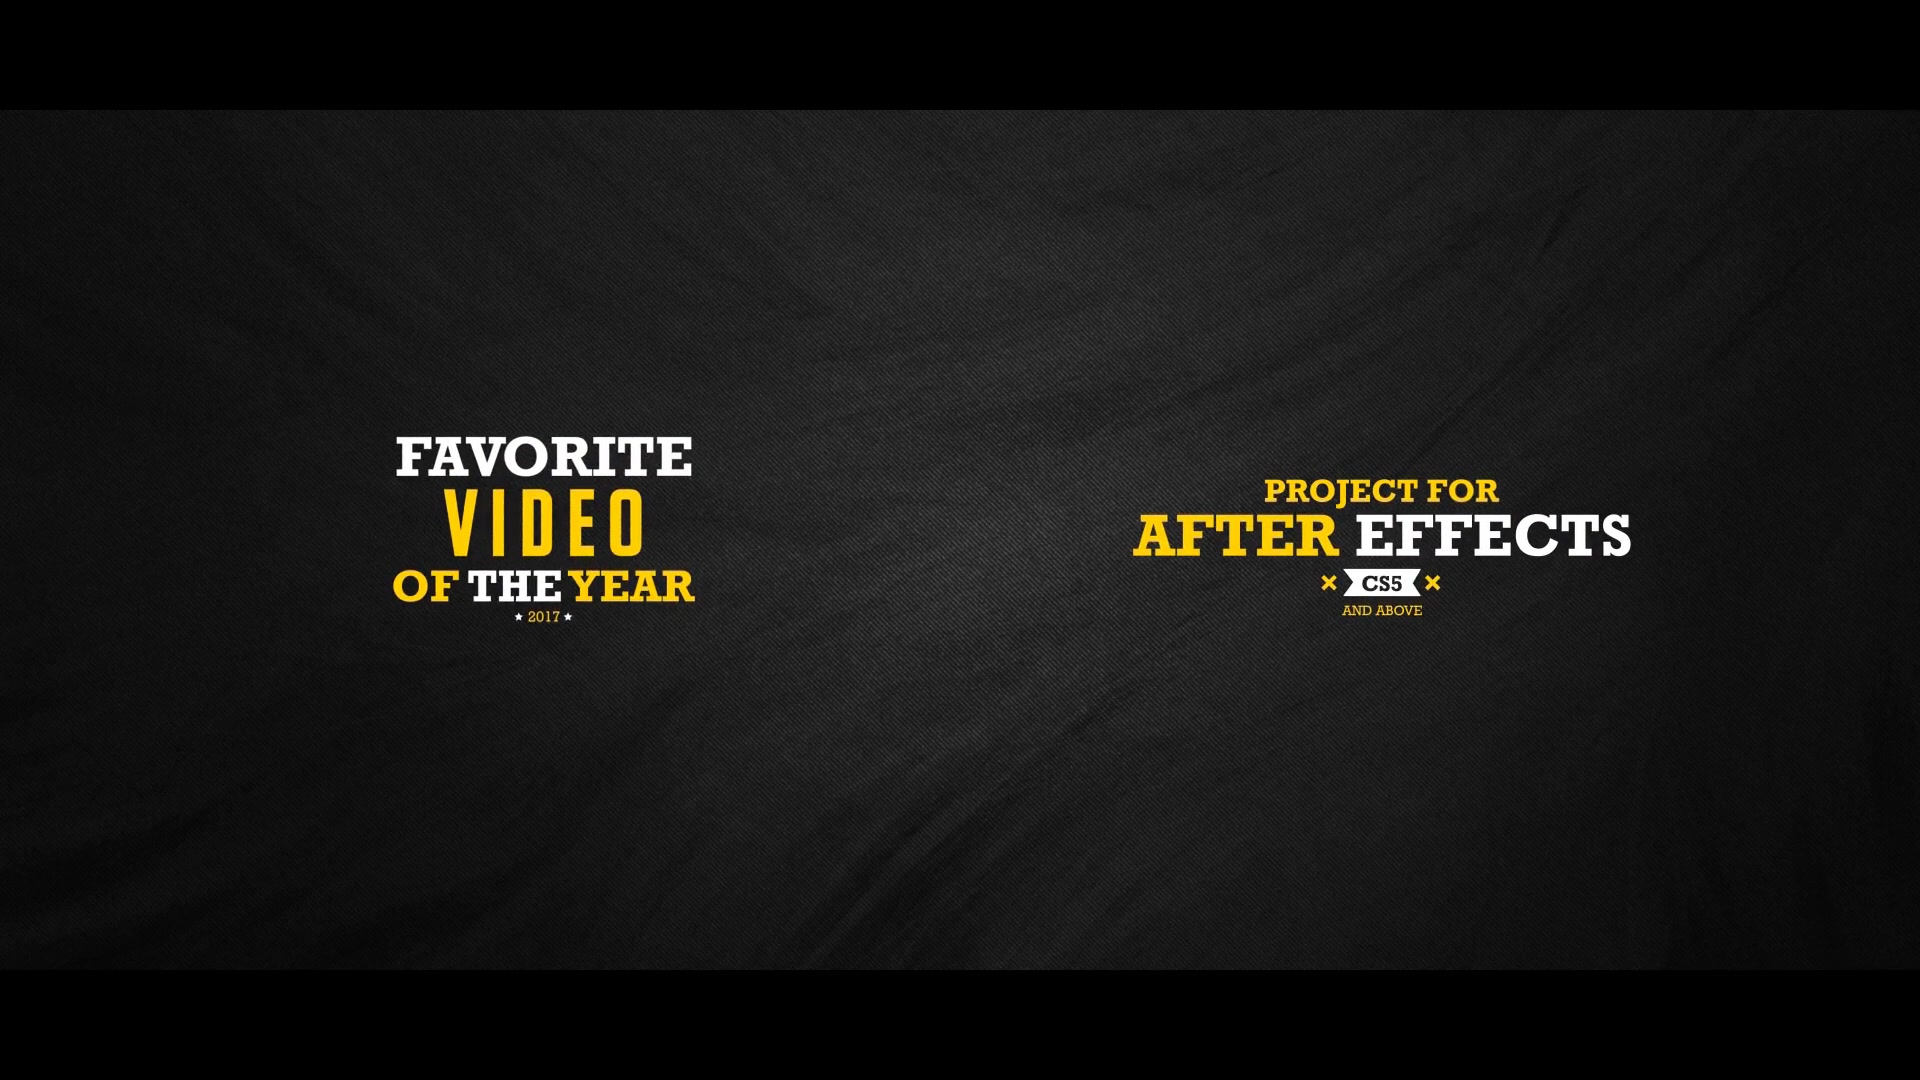 Dynamic Typography Pack - Download Videohive 19198298